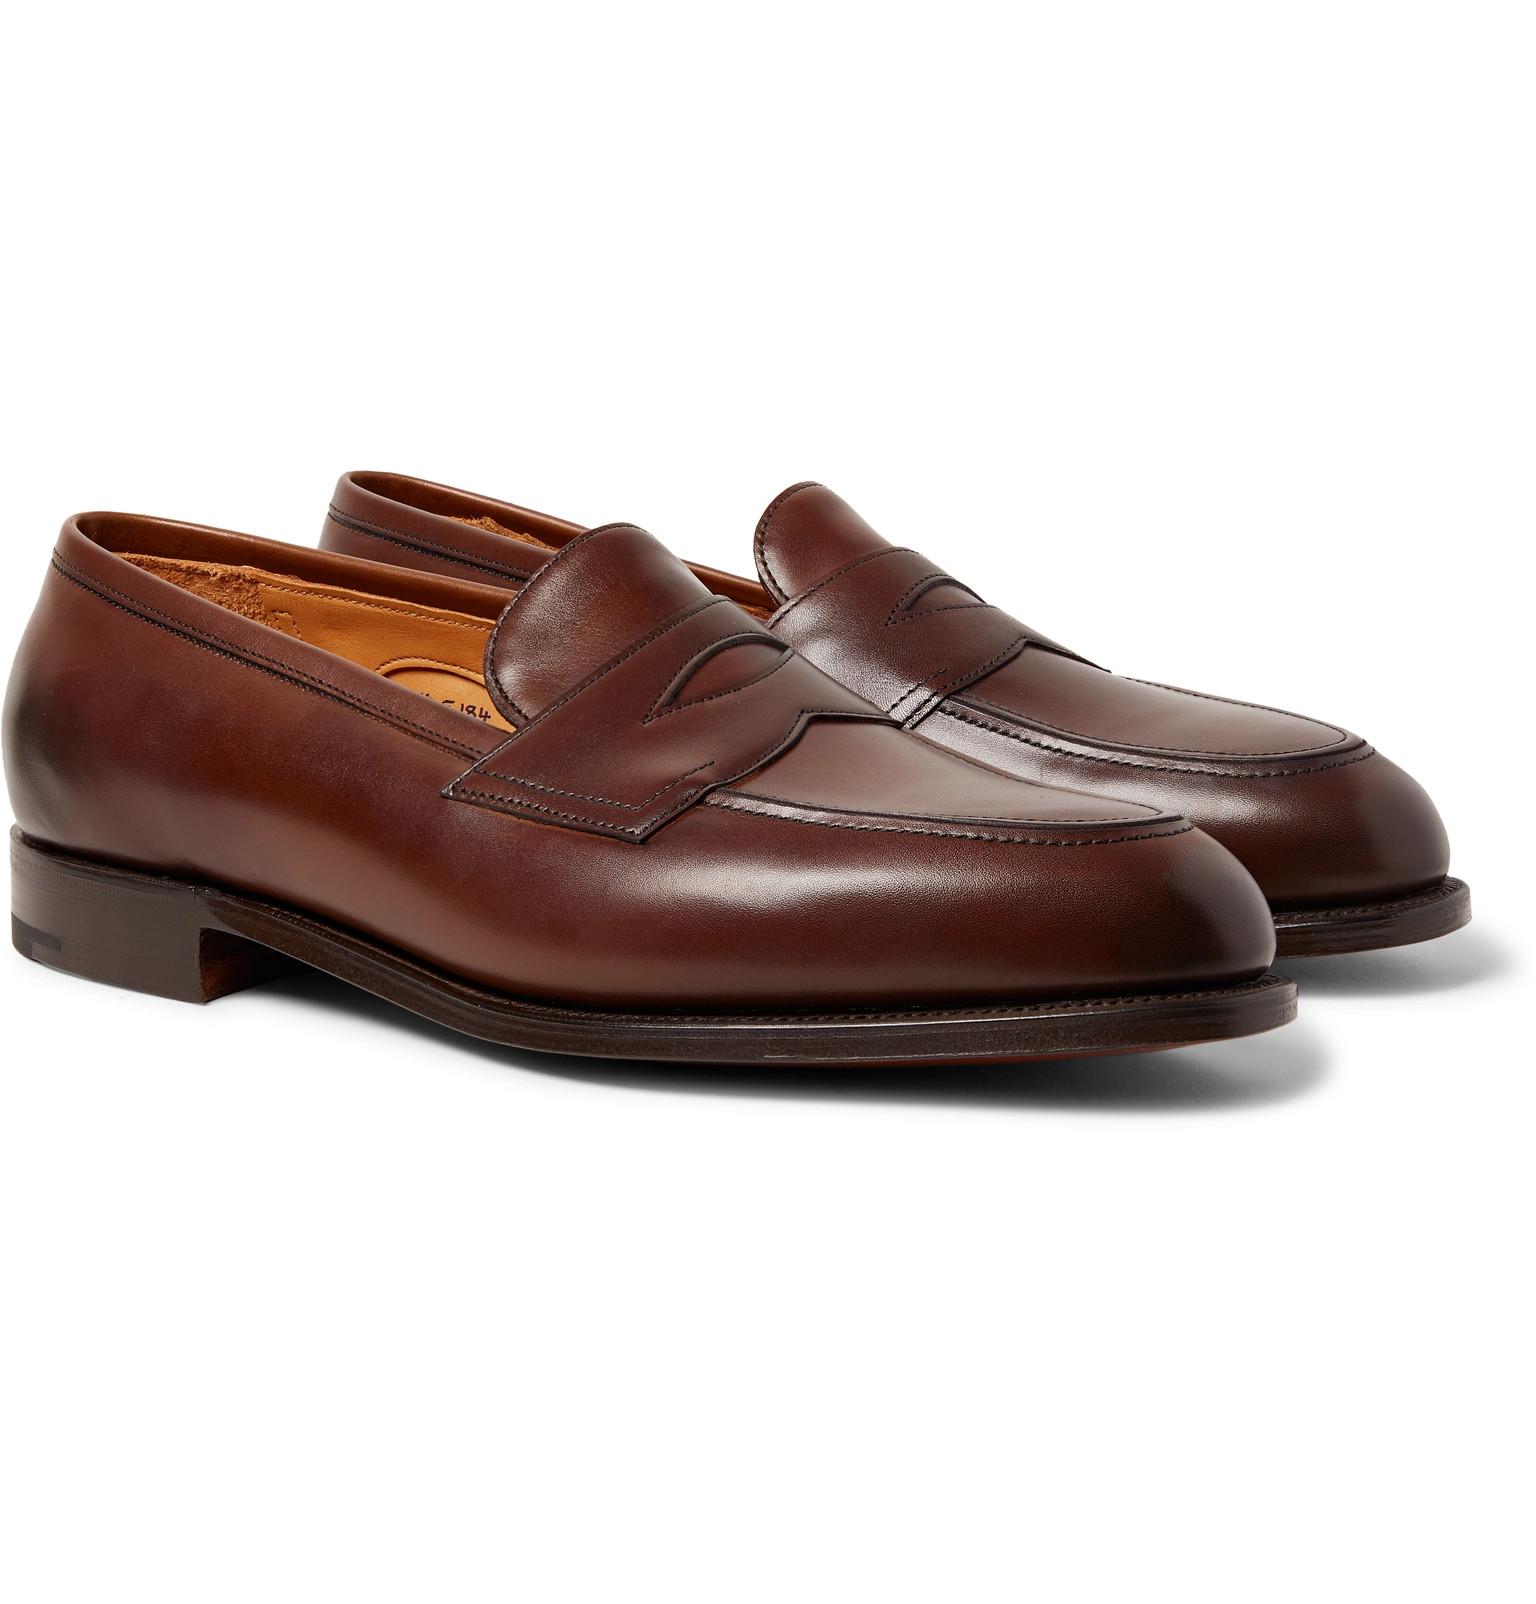 Edward Green Piccadilly Leather Penny Loafers in Brown for Men - Lyst